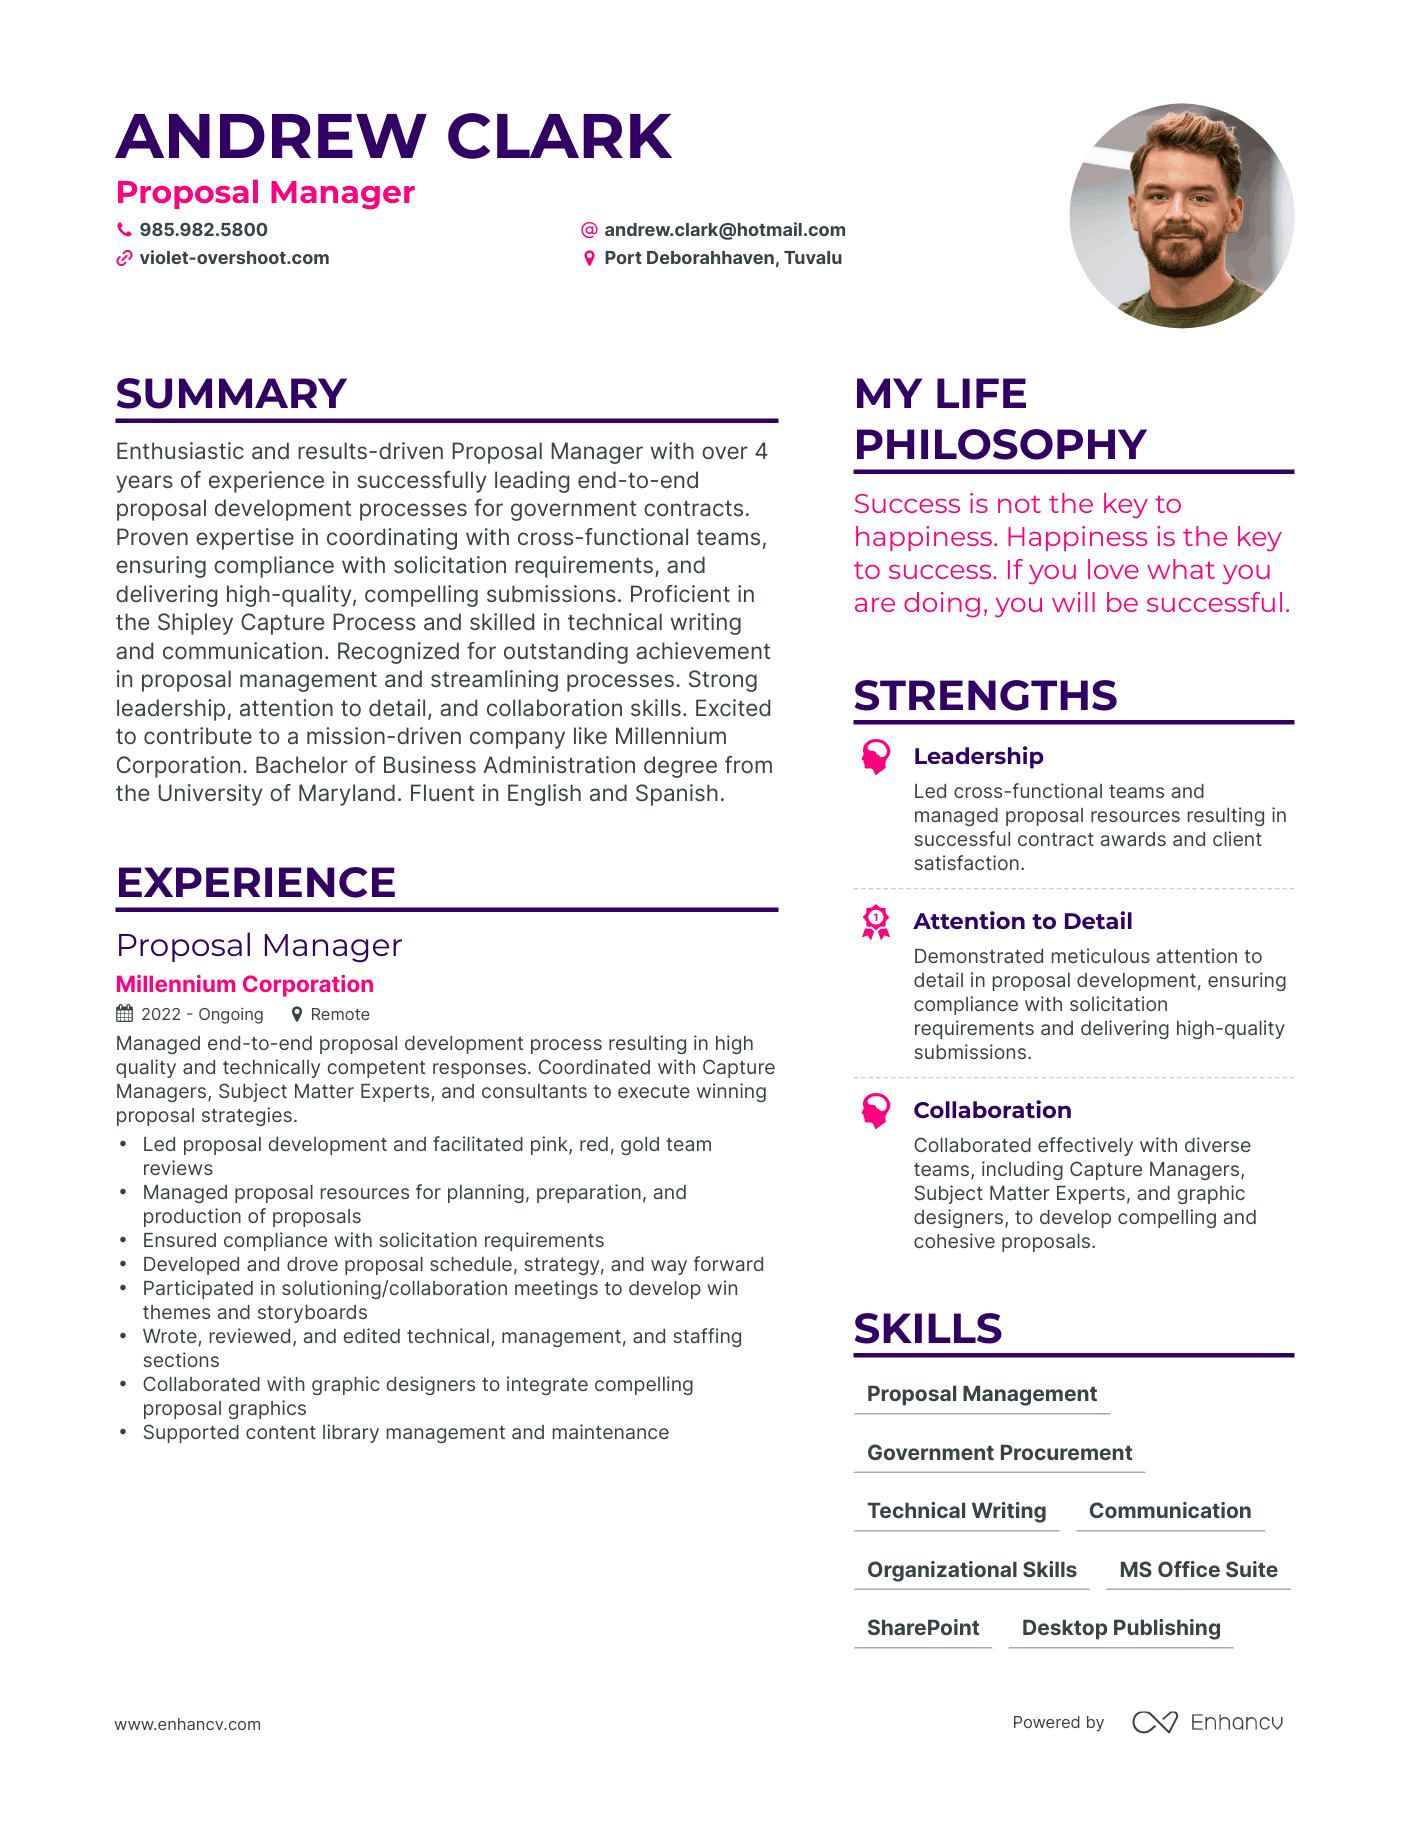 Proposal Manager resume example